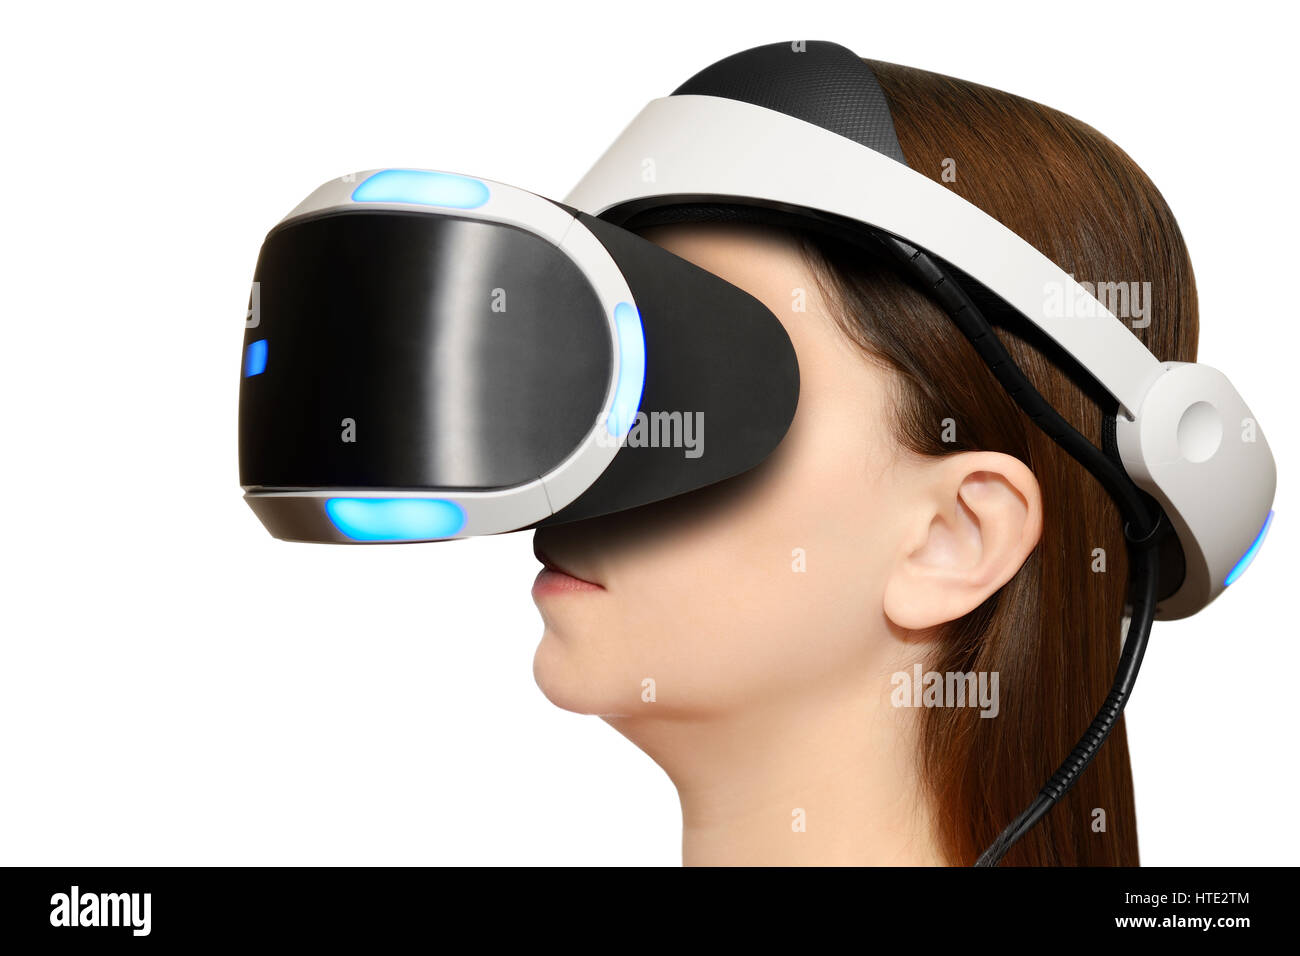 Woman Wearing a Sony Playstation VR Headset Against a White Background. Stock Photo